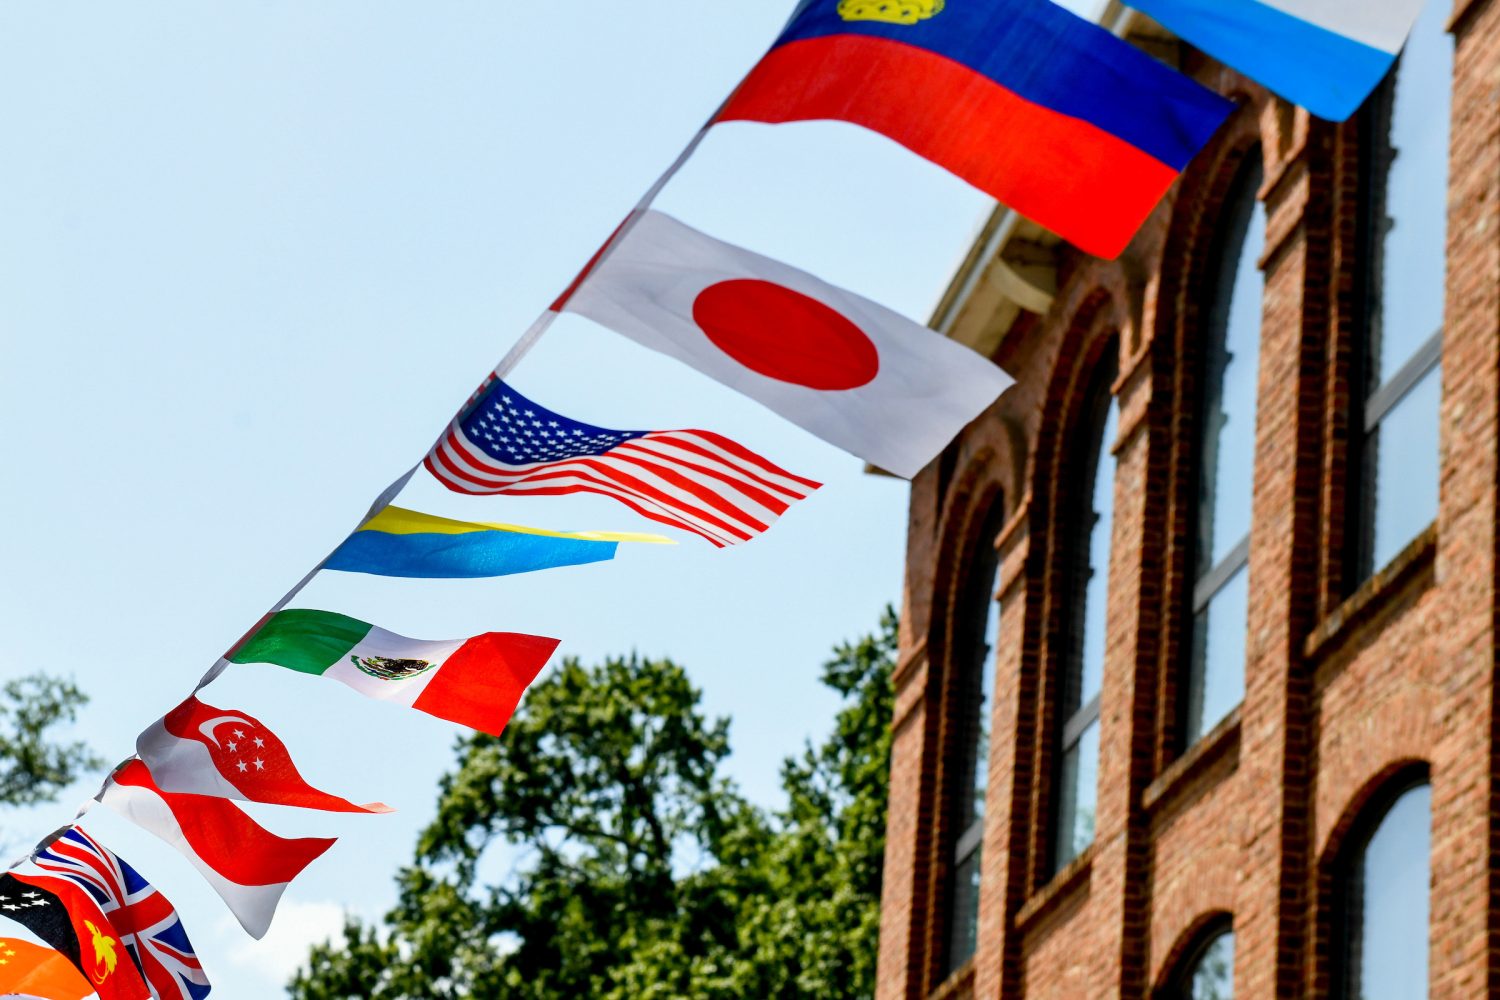 International flags fly in the Global Courtyard on main campus.